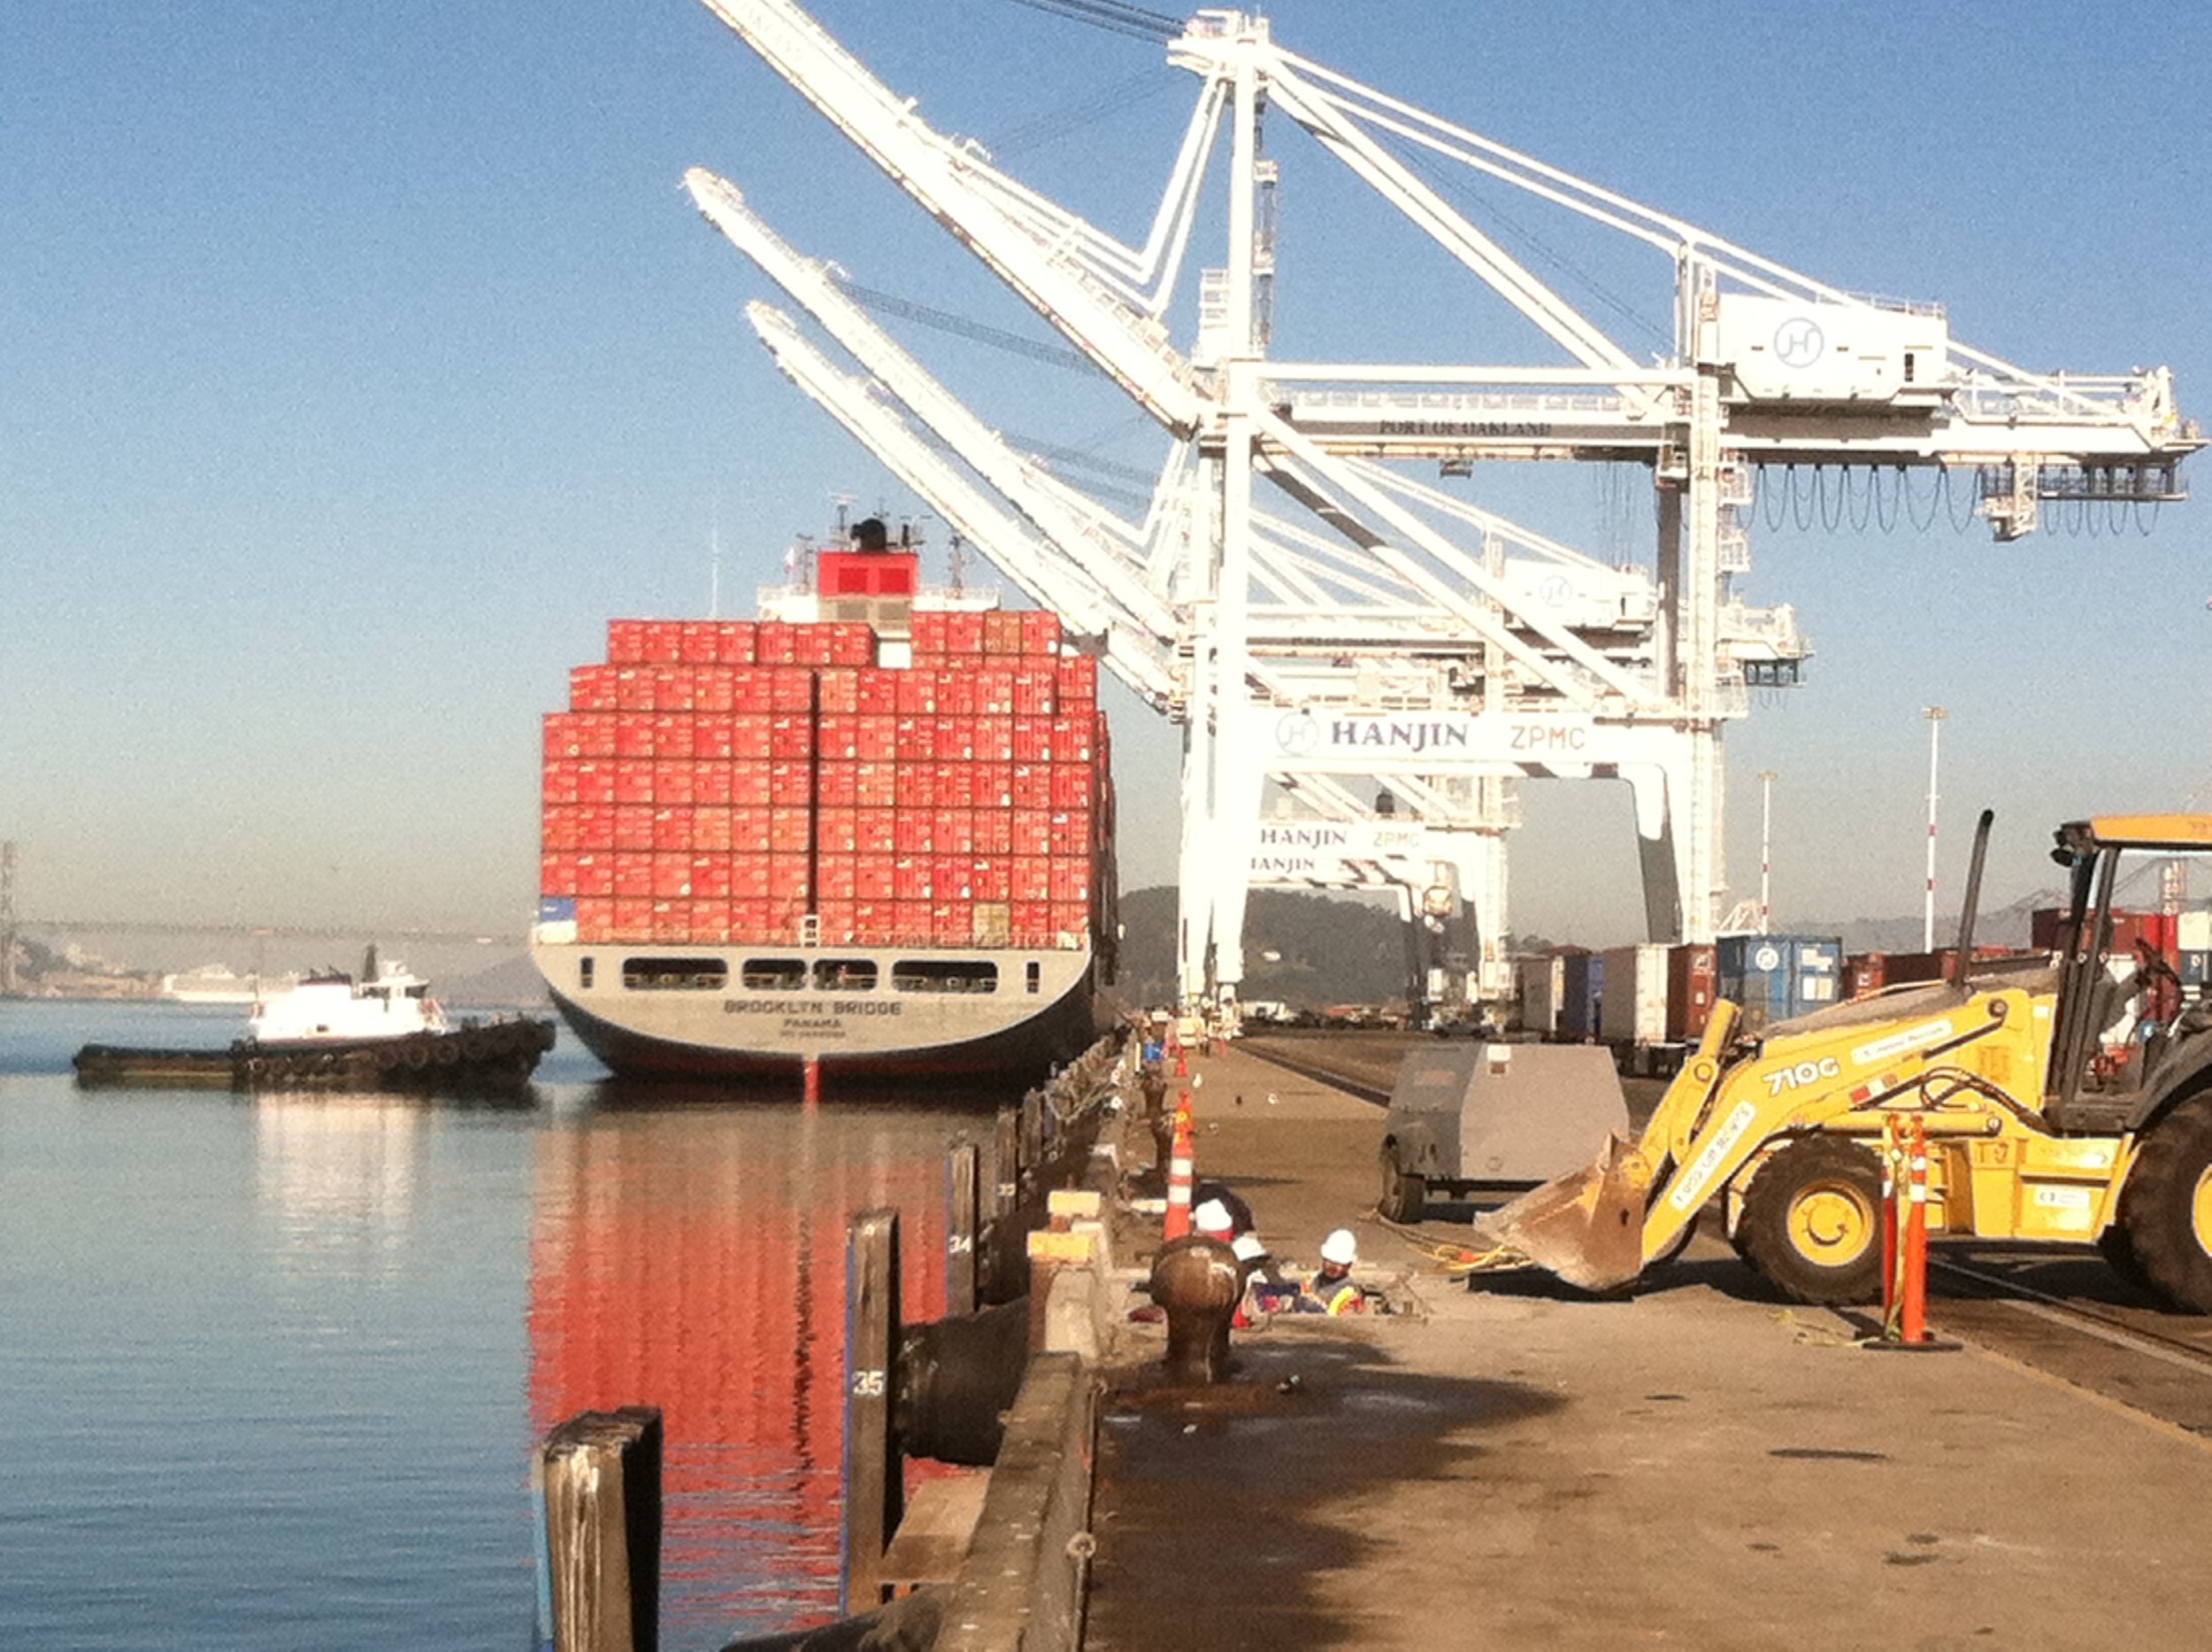   Welcome To Valentine Corporation   Project: Port of Oakland  If It's Difficult Or Unusual, Call Us!   Contact Us  